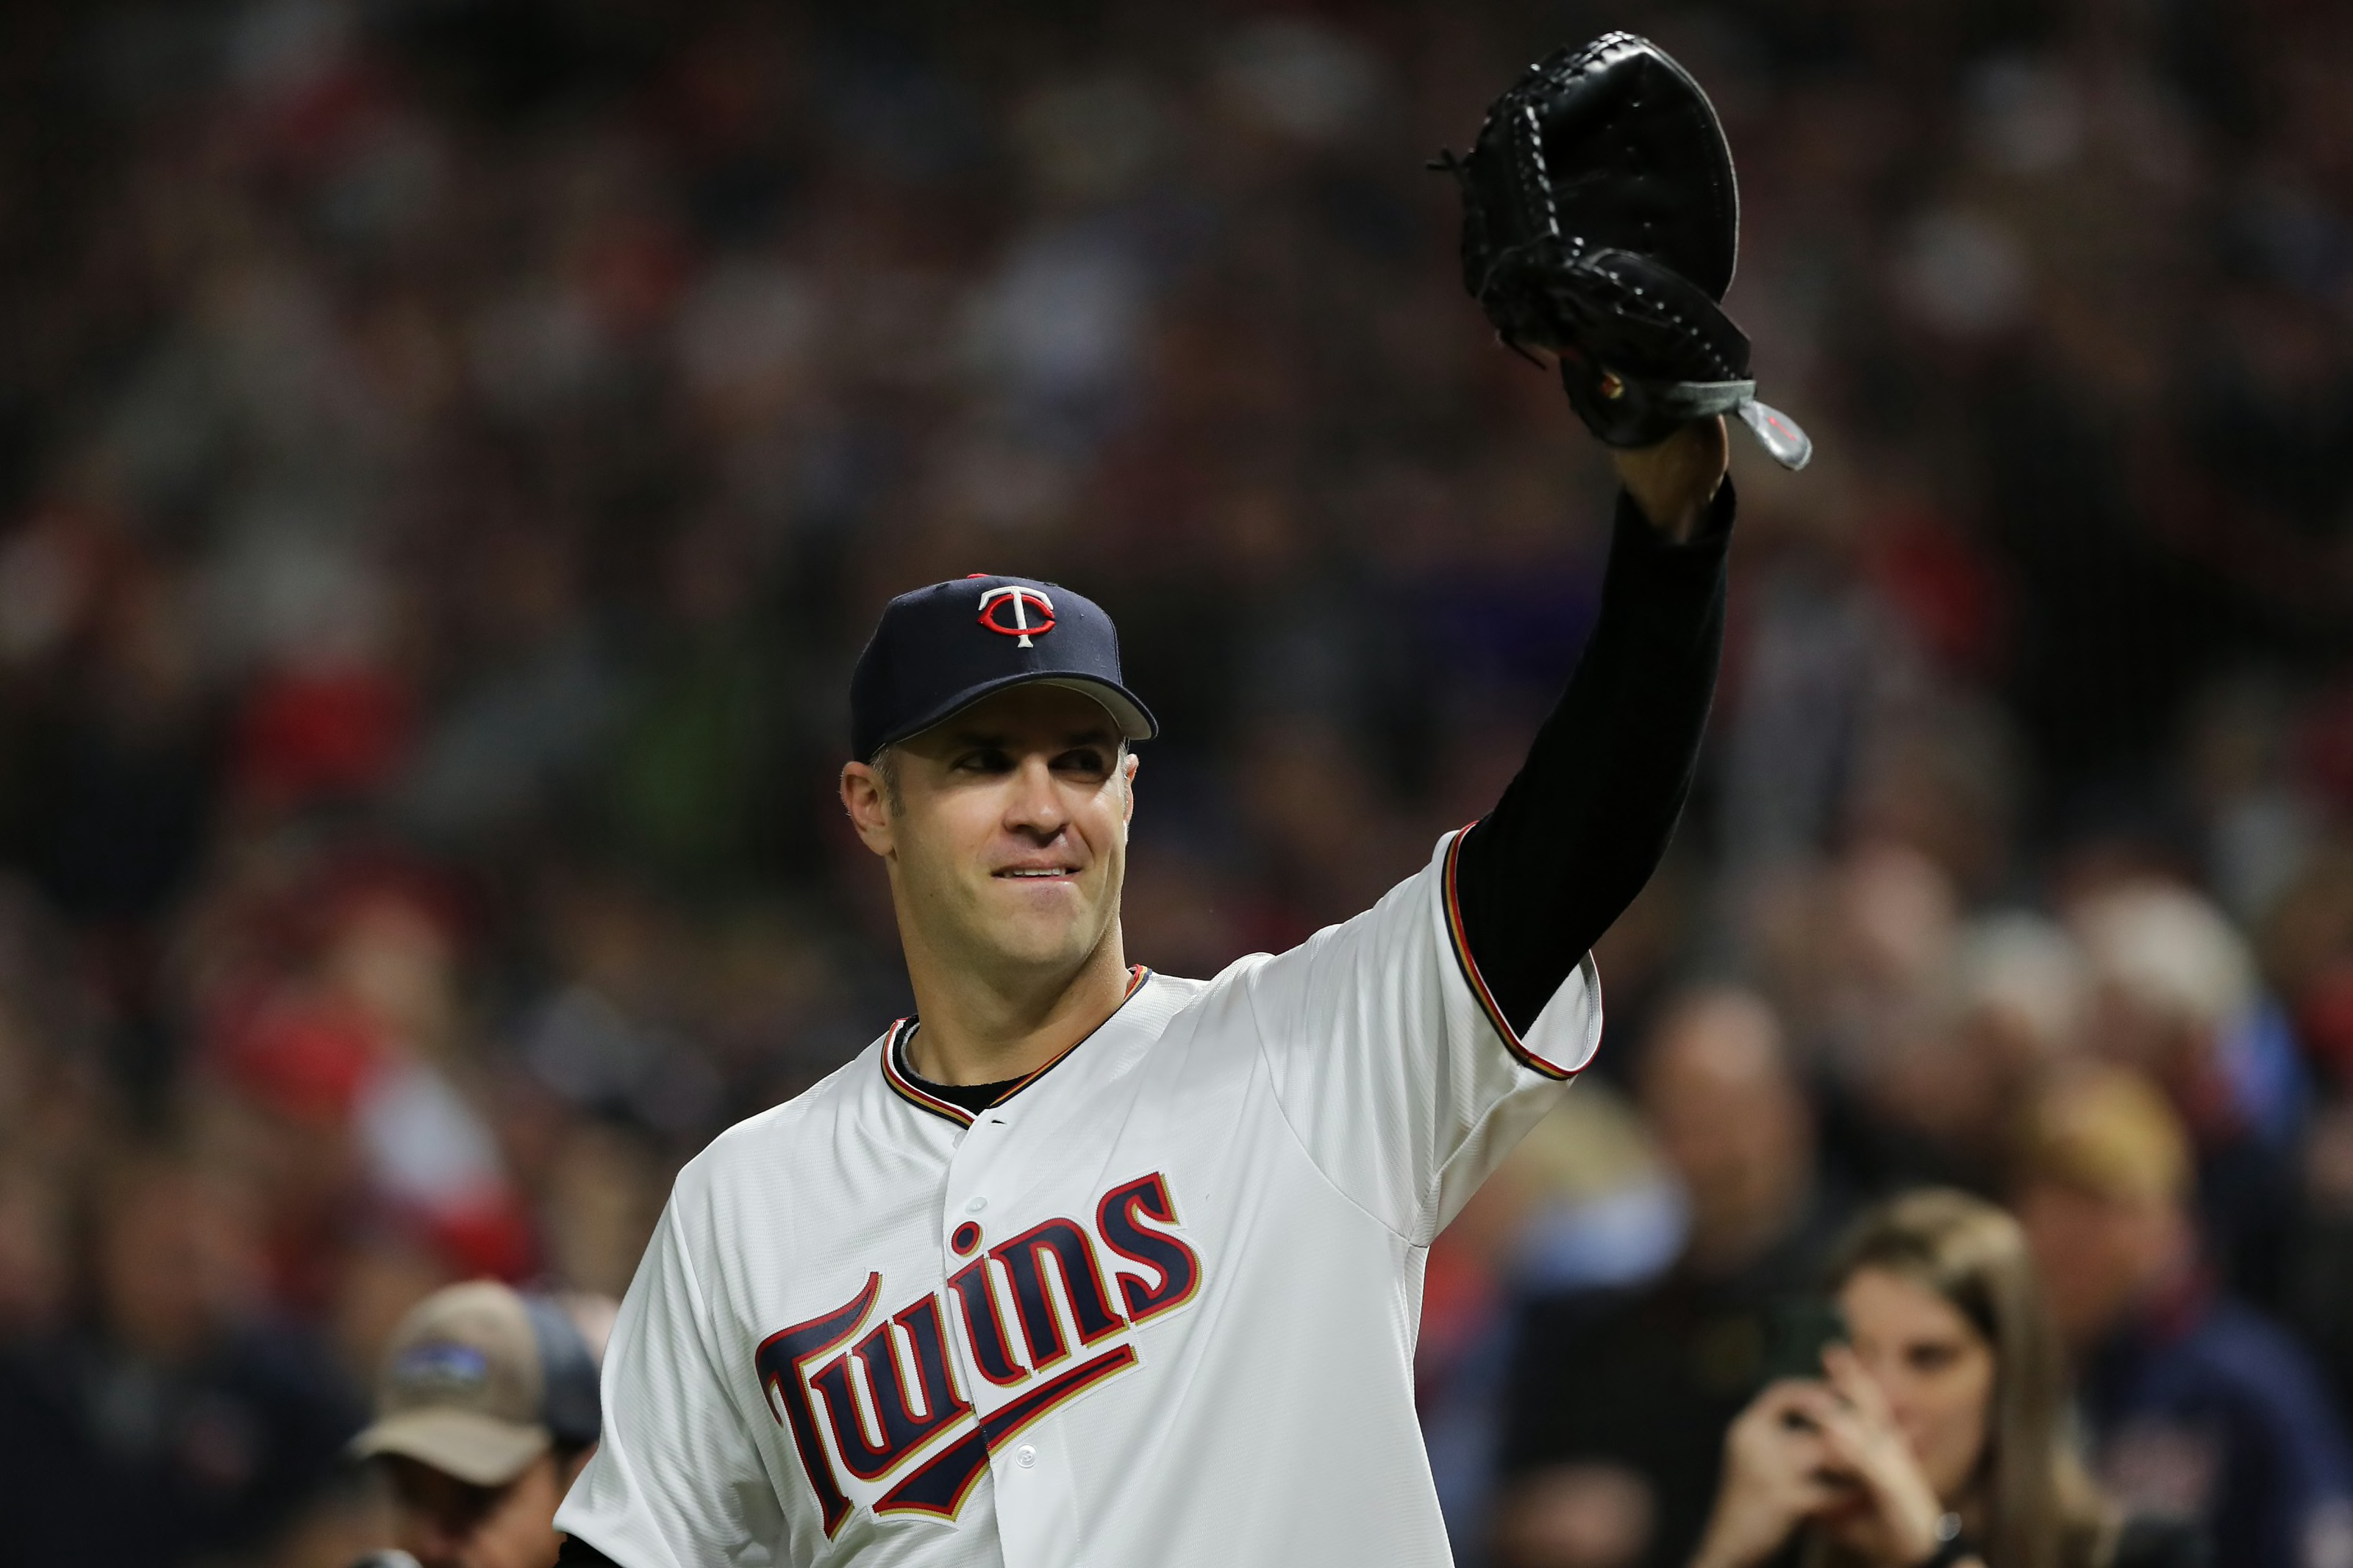 Minnesota Twins The Top 5 Catchers in Franchise History